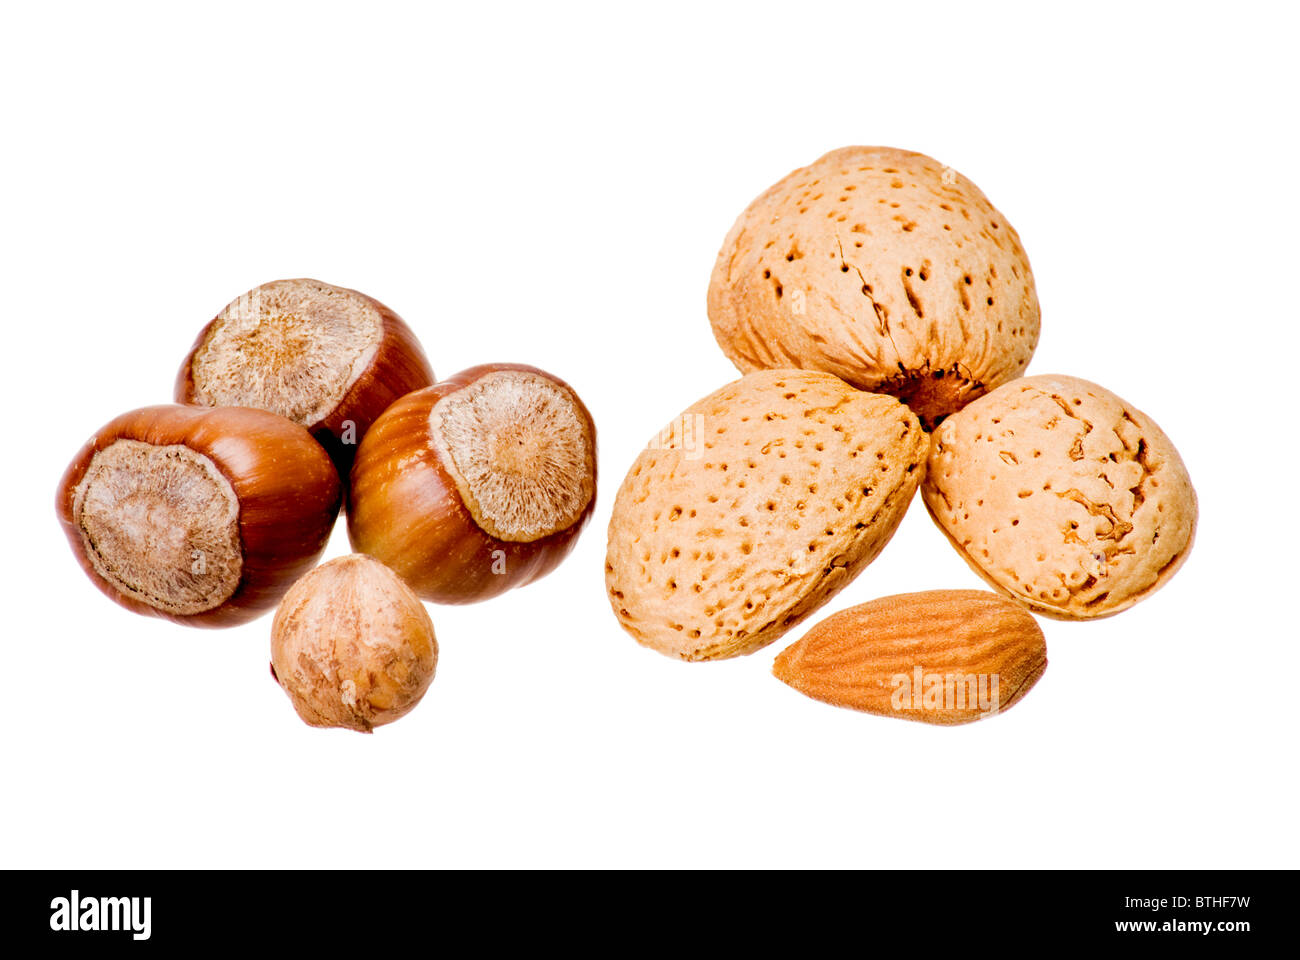 Nuts and almonds over white background Stock Photo